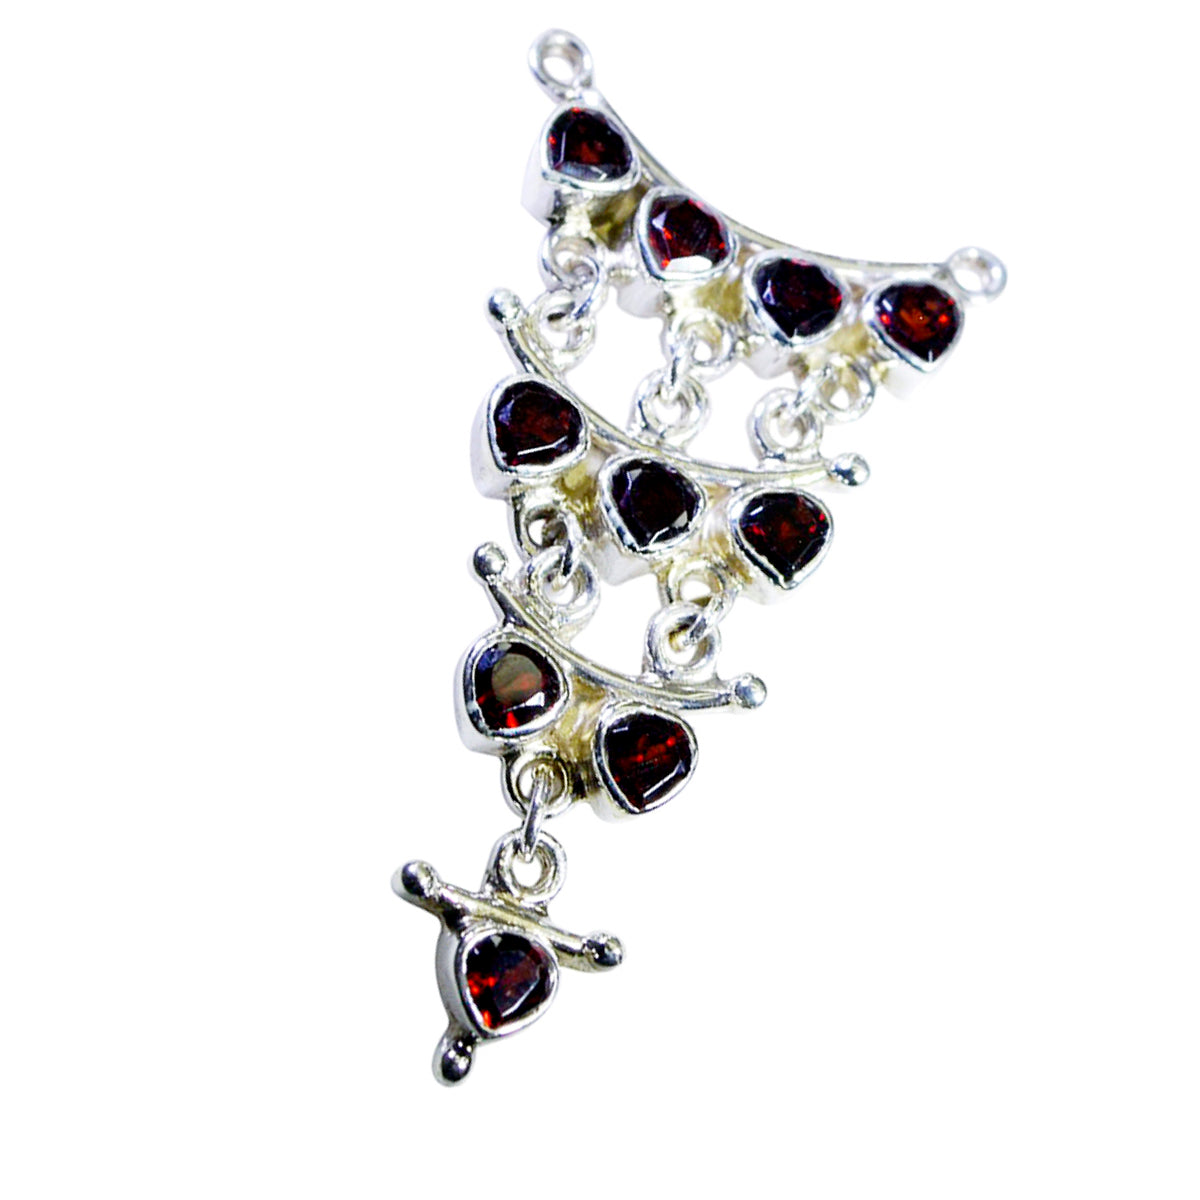 Riyo Charming Gems Heart Faceted Red Garnet Solid Silver Pendant Gift For Easter Sunday